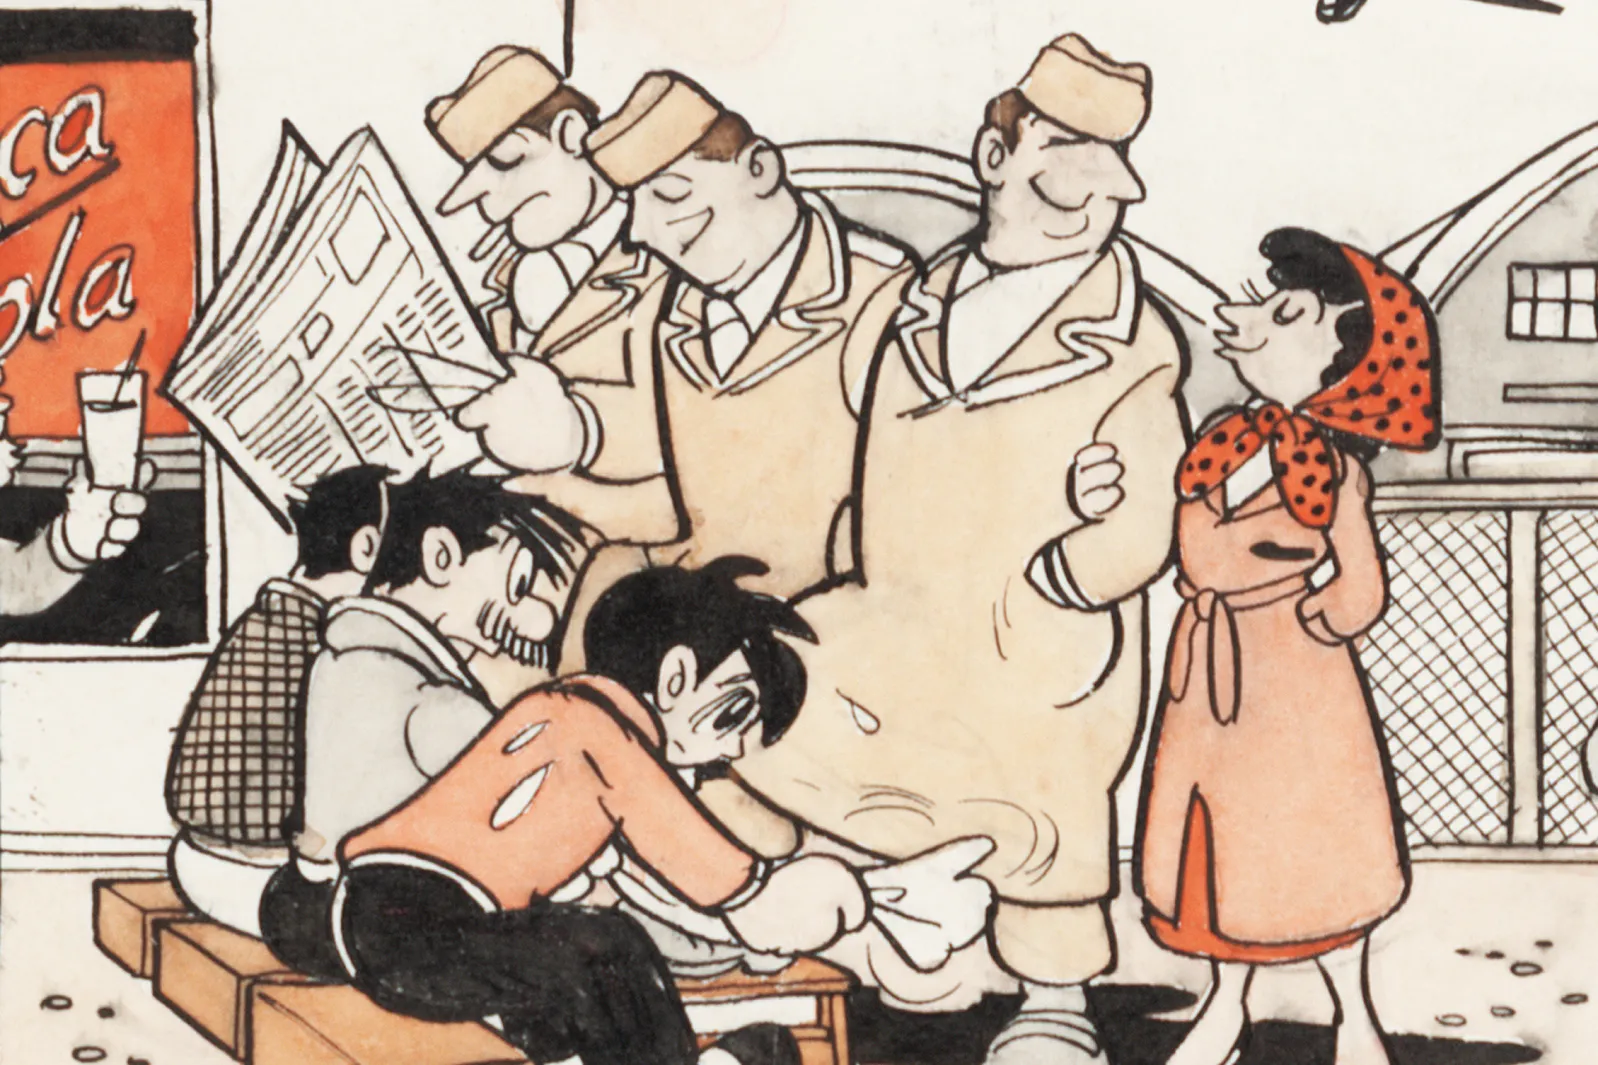 In a line drawing with some colors, a line of three white men, the third of whom has his elbow linked with a woman, gets shoes shined by three Japanese men who appear significantly smaller. In the background are a plane and what is likely a military base. The three men are probably troops. The main character, Atom Boy, is the closest of the shoe shiners, and he seems to be working hard.